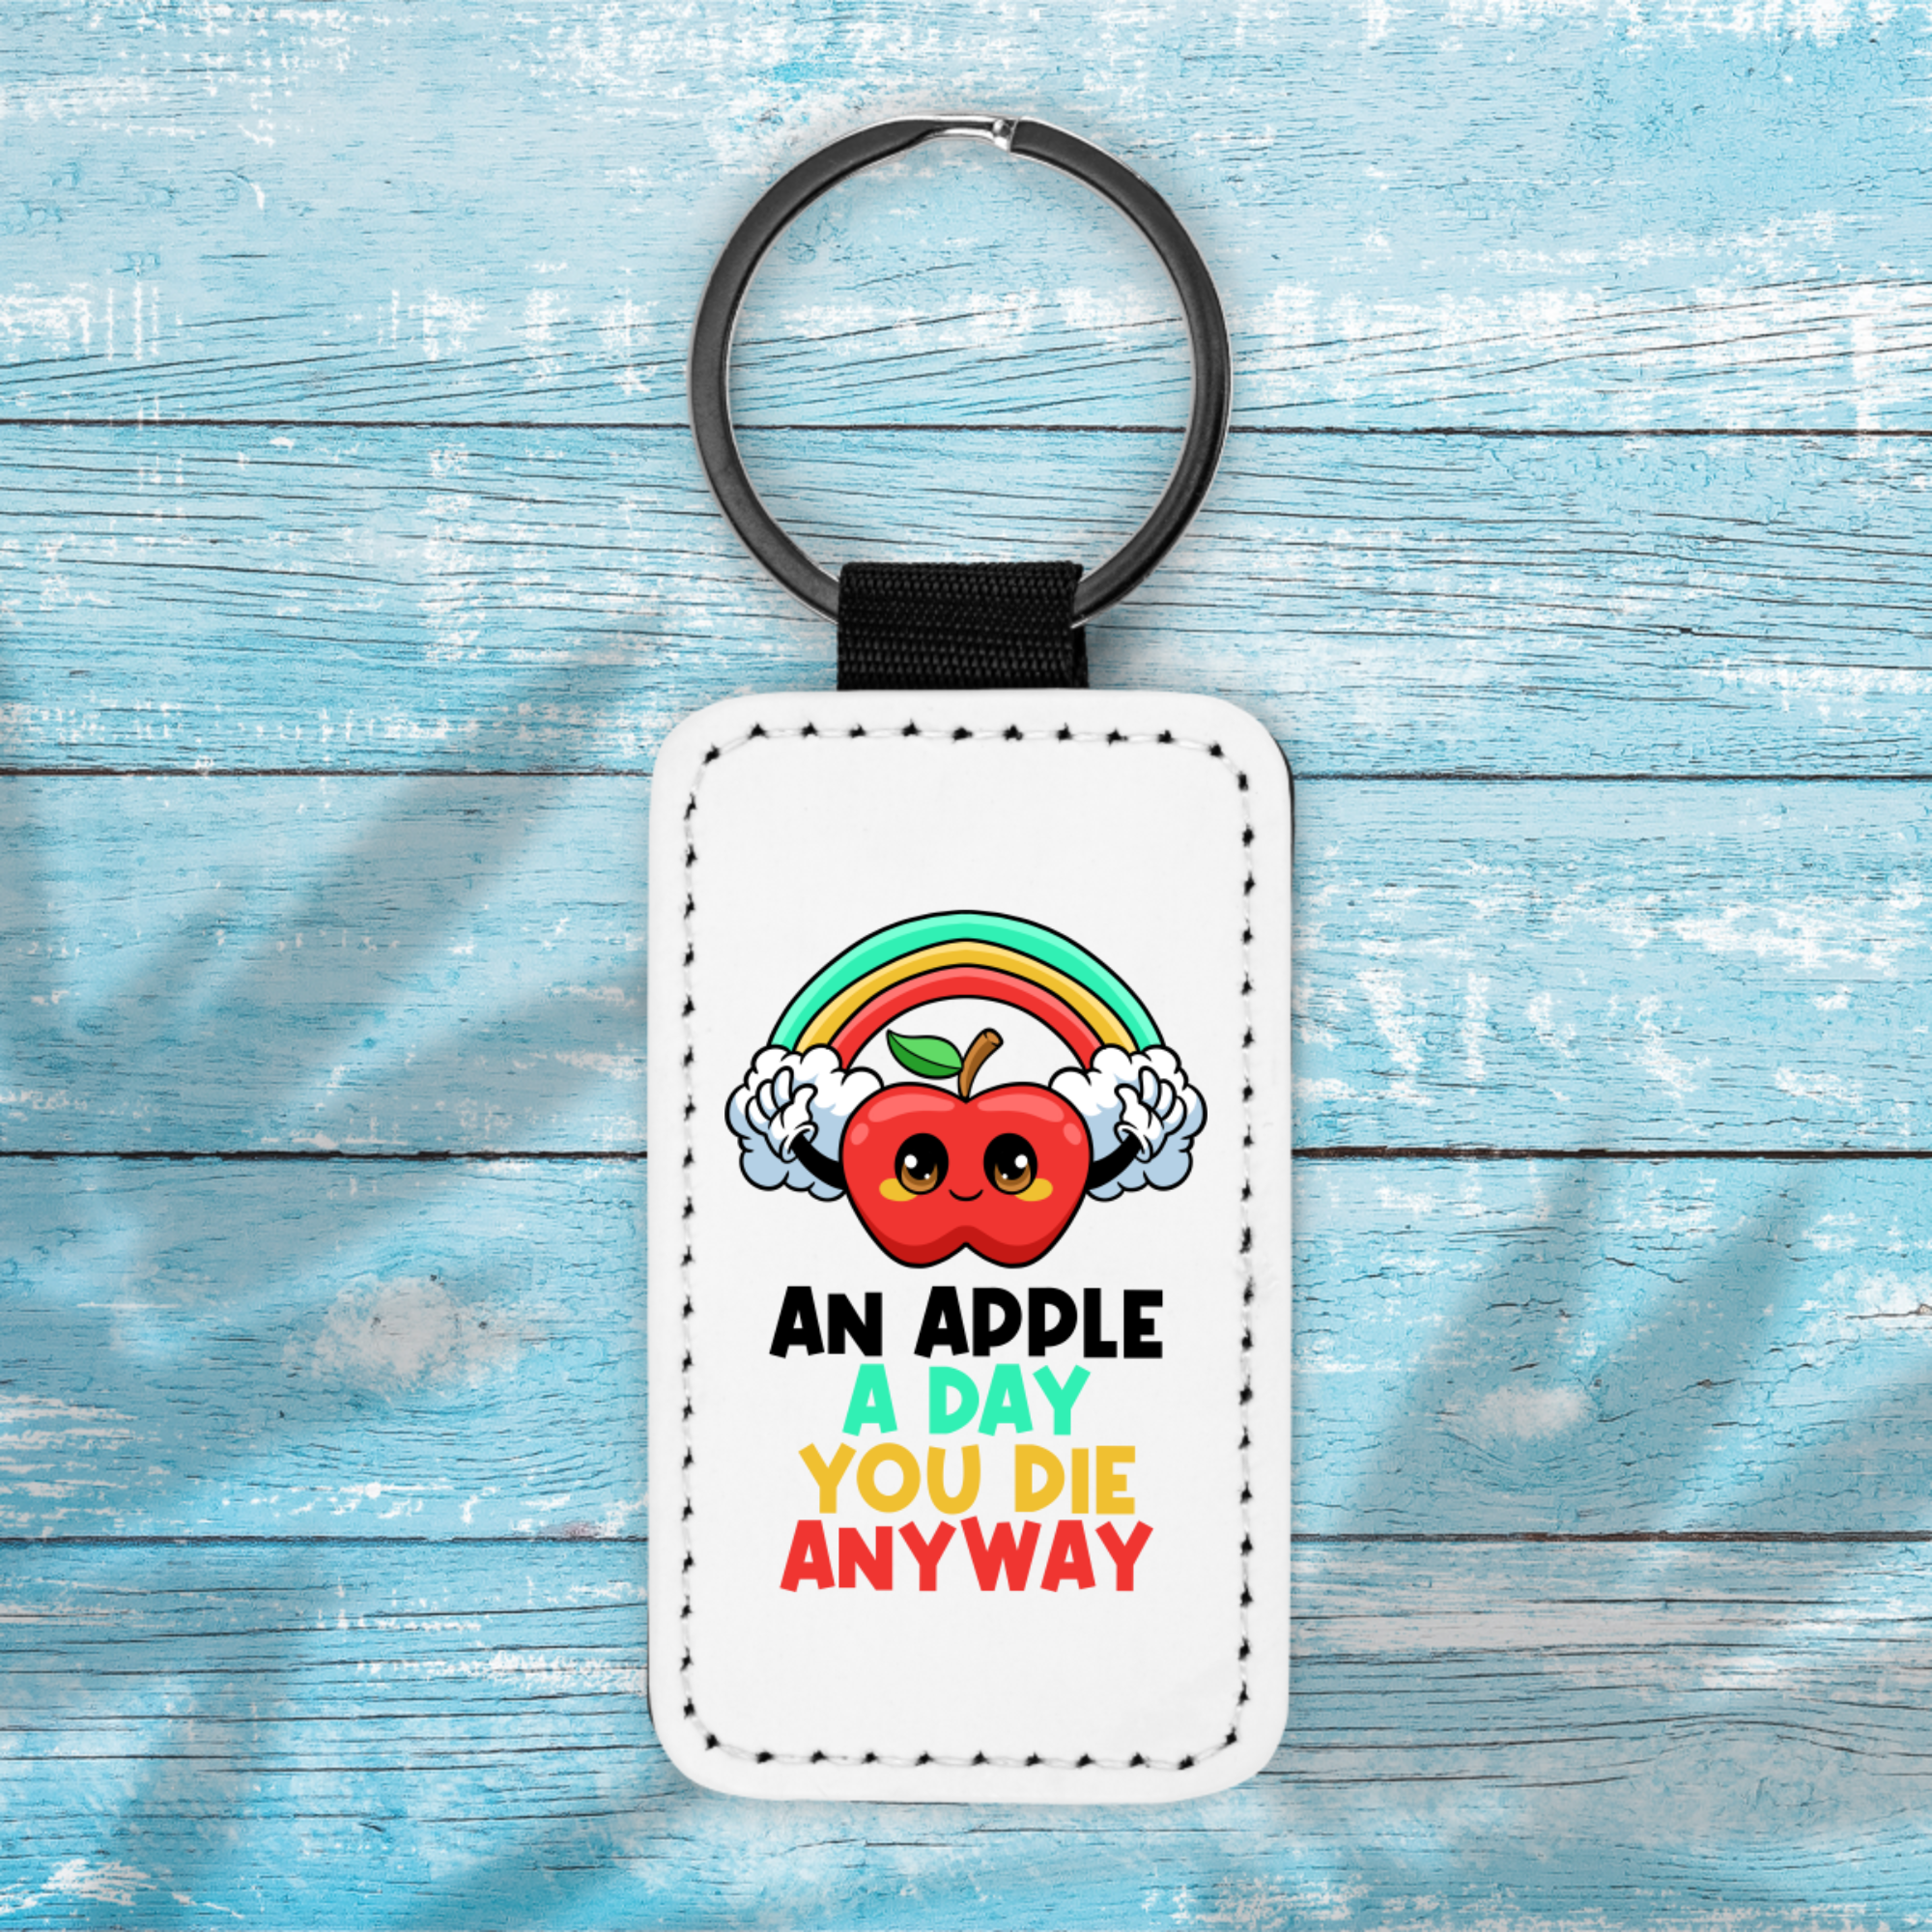 Apple A Day - Key Chain